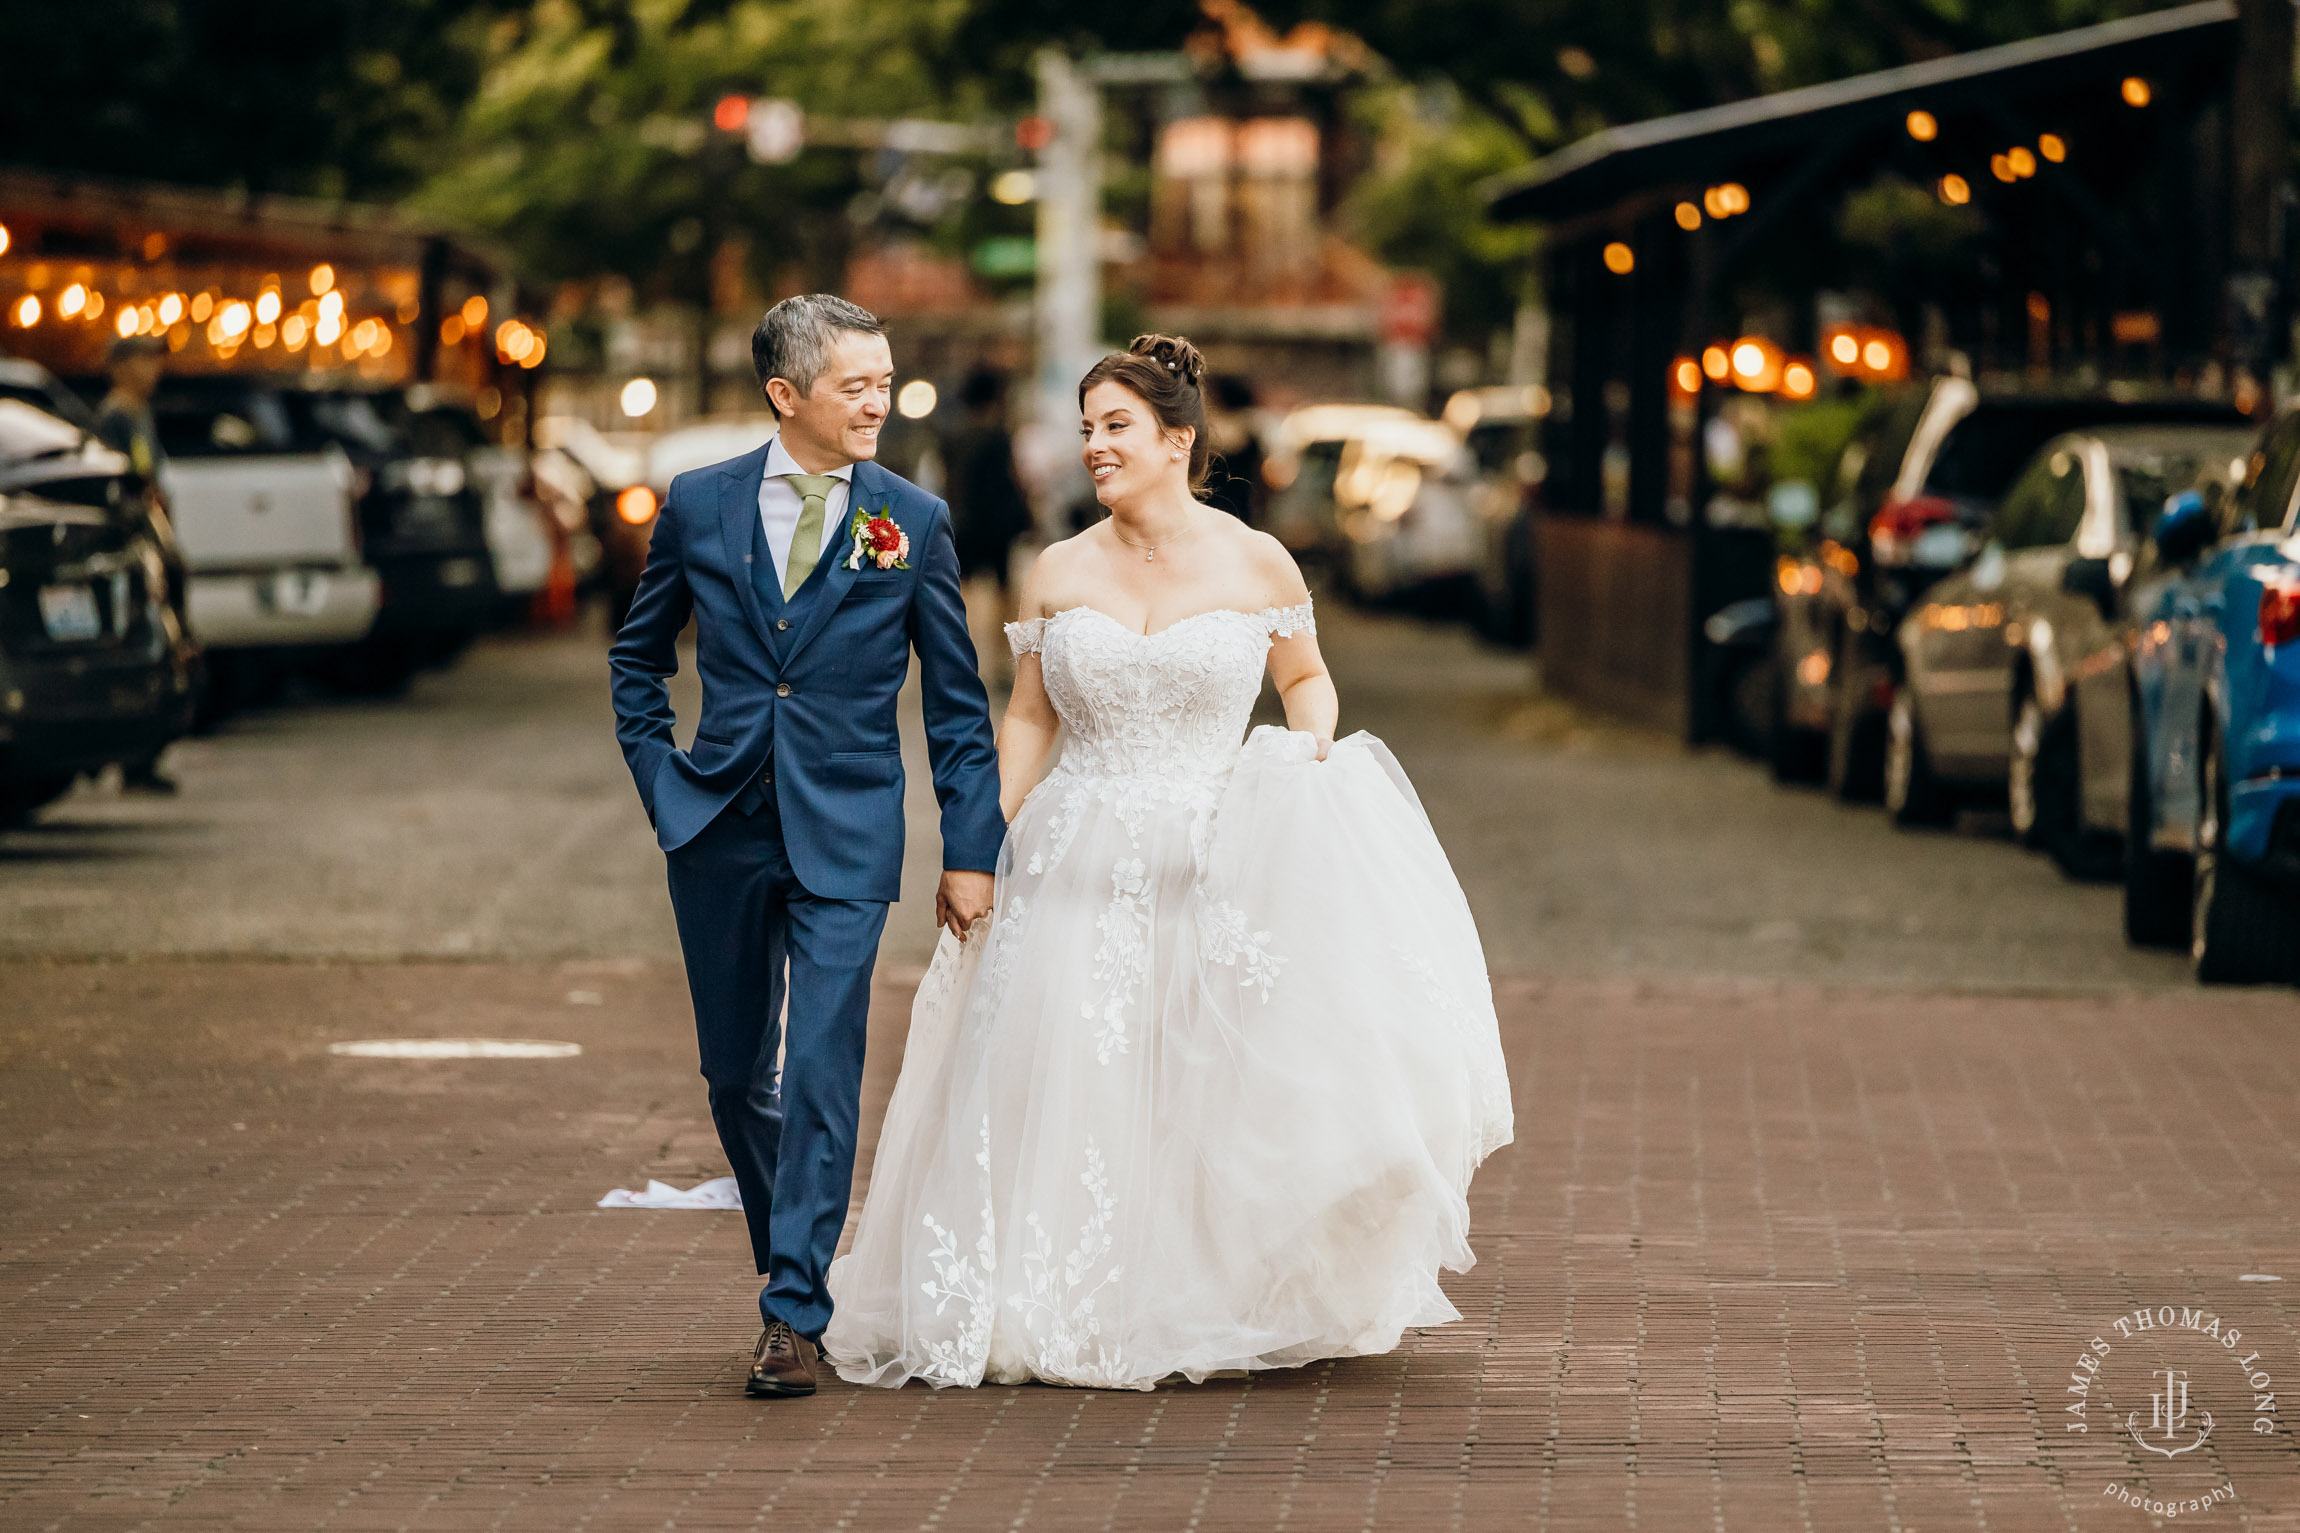 Olympic Rooftop Pavilion and Ballard Hotel Seattle wedding by Seattle wedding photographer James Thomas Long Photography